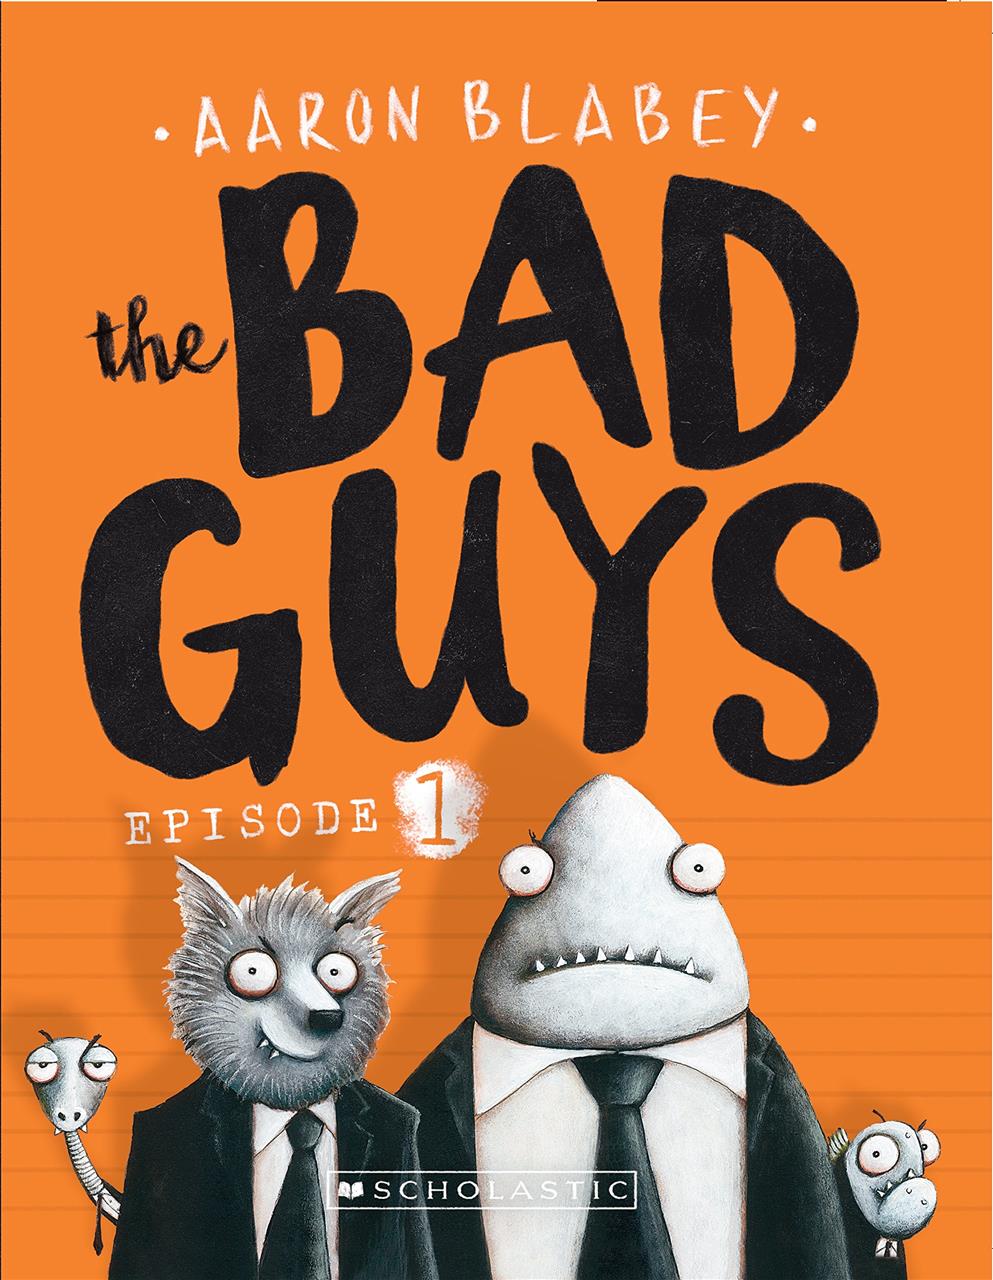 The Bad Guys Episode 1